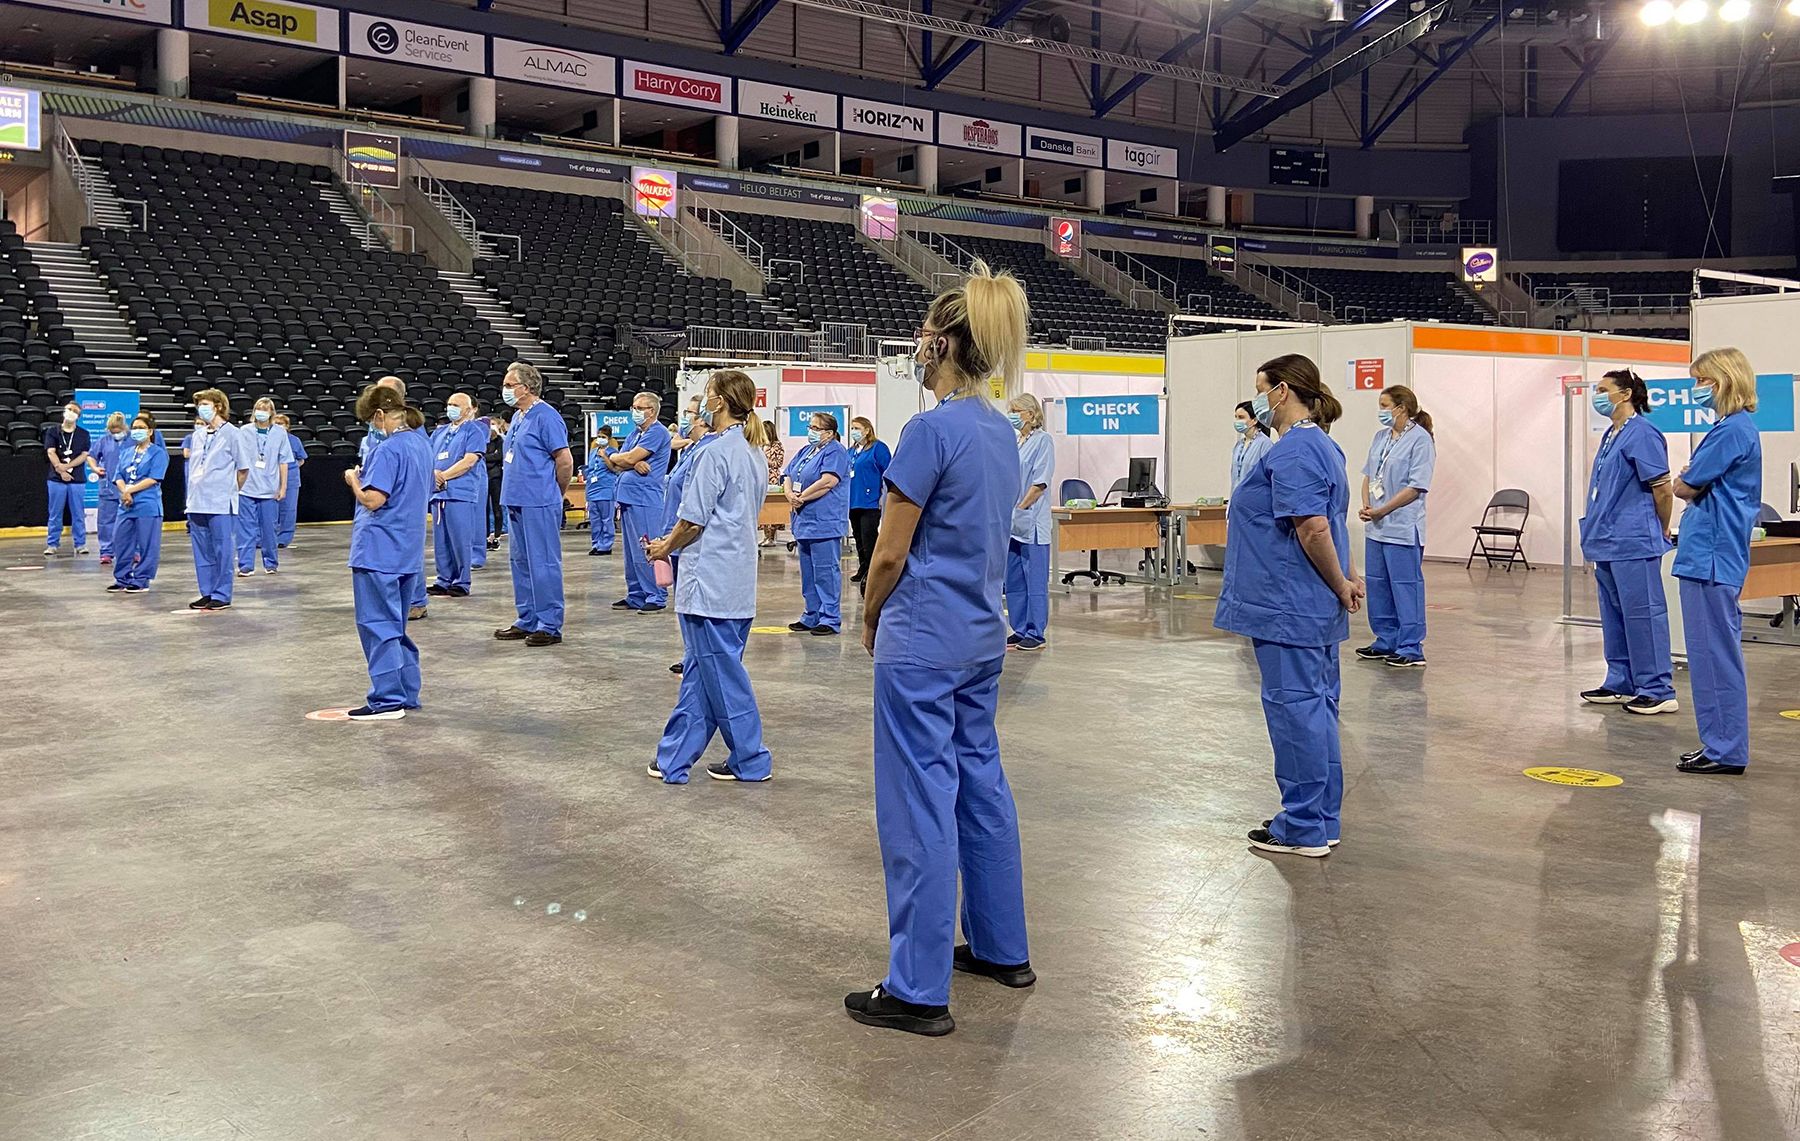 PROTECTION: Medical staff prepare for vaccinations at the SSE Arena in Belfast